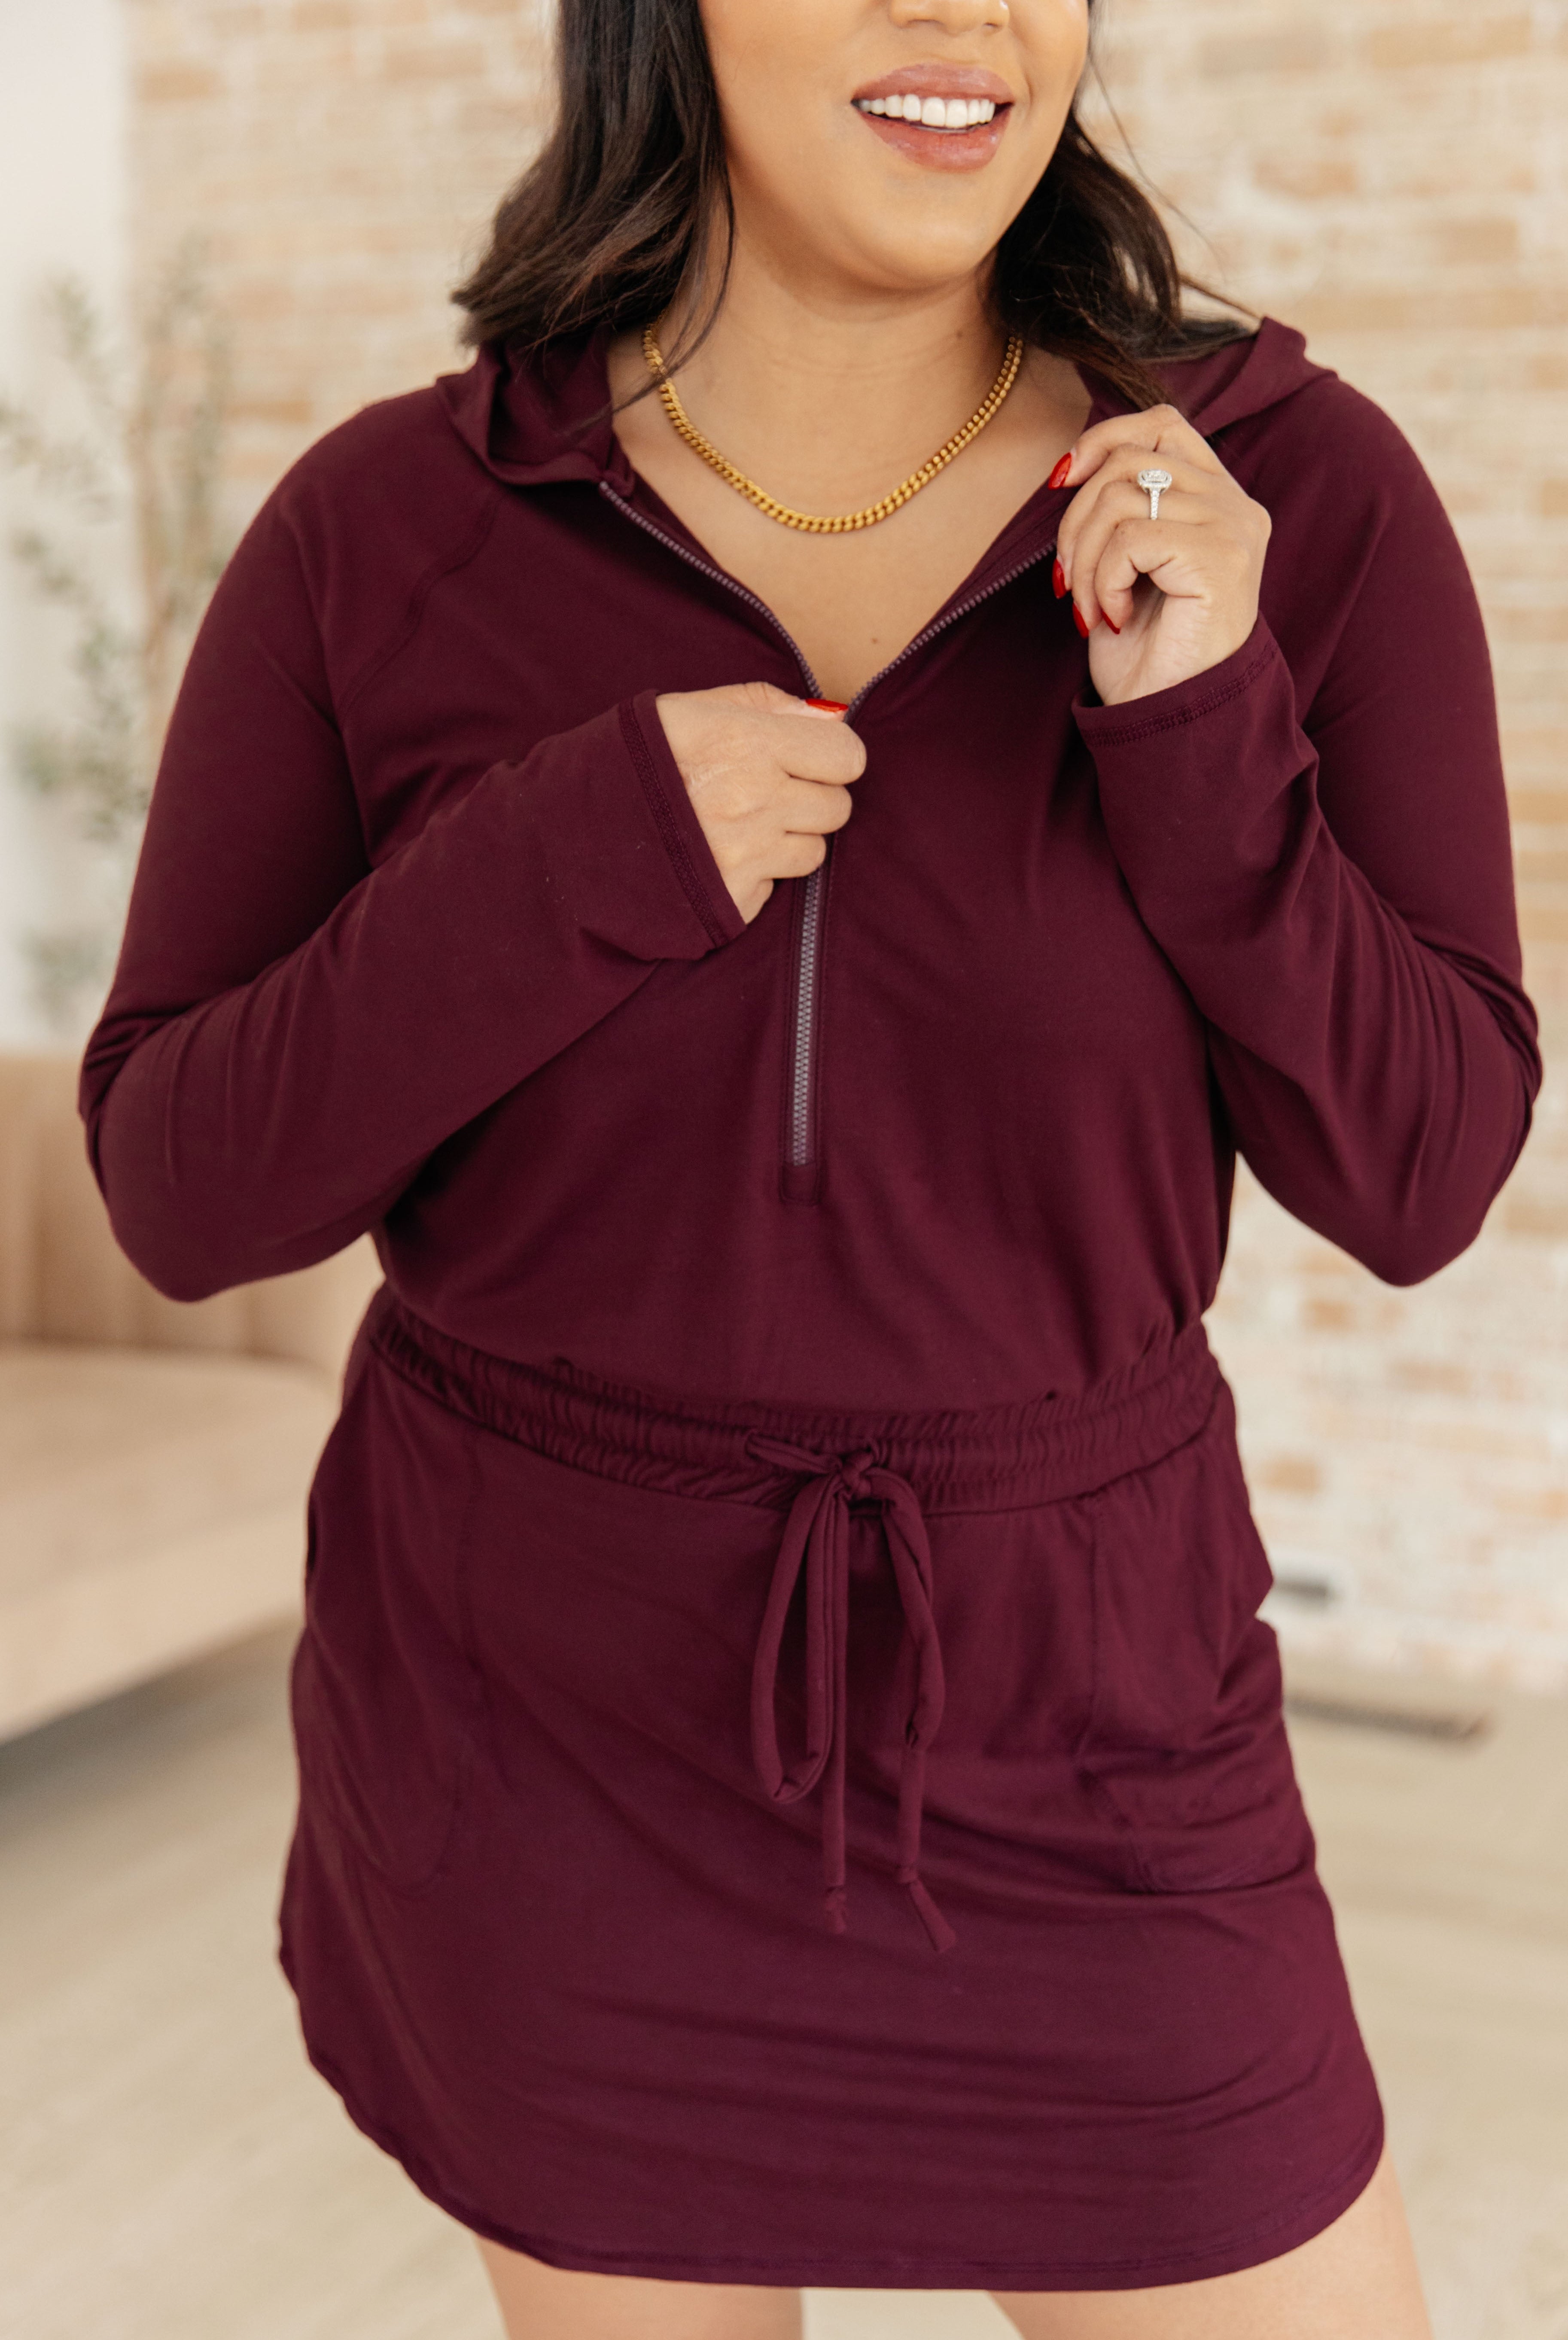 Getting Out Long Sleeve Hoodie Romper in Maroon-Jumpsuits & Rompers-Krush Kandy, Women's Online Fashion Boutique Located in Phoenix, Arizona (Scottsdale Area)